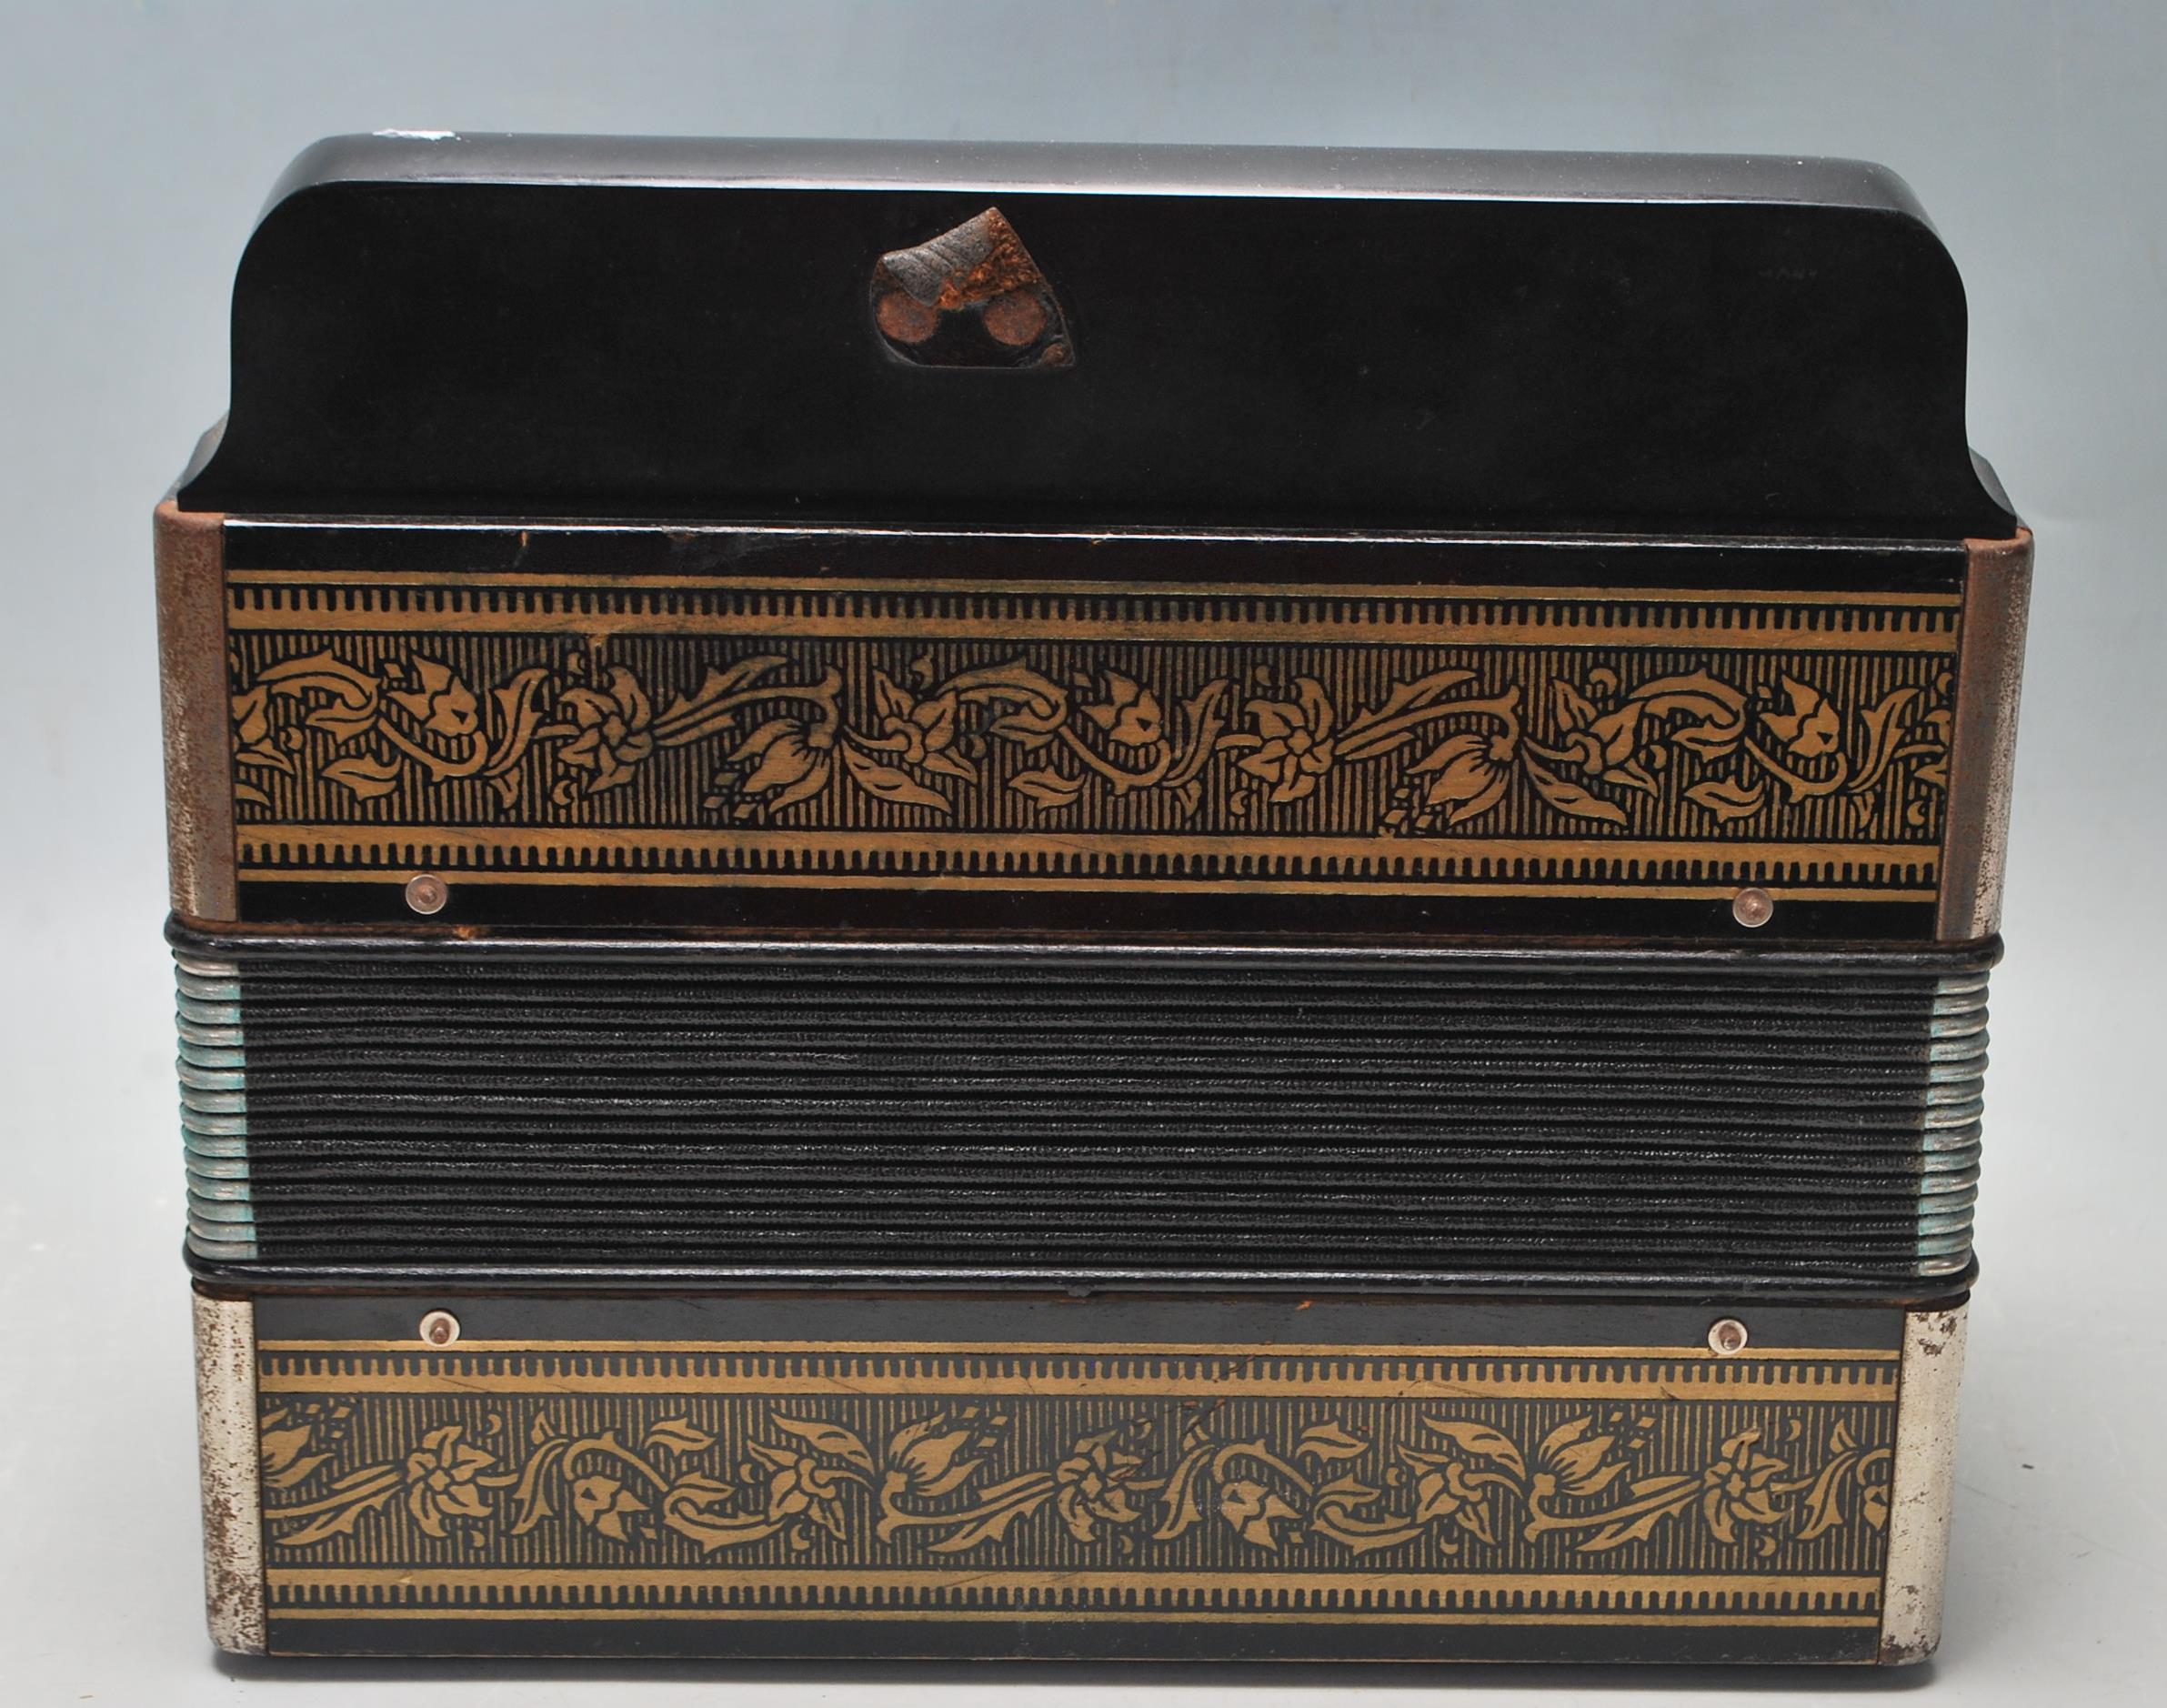 EARLY 20TH CENTURY 1930S VINTAGE ACCORDIAN BY HOHNER - Image 6 of 7